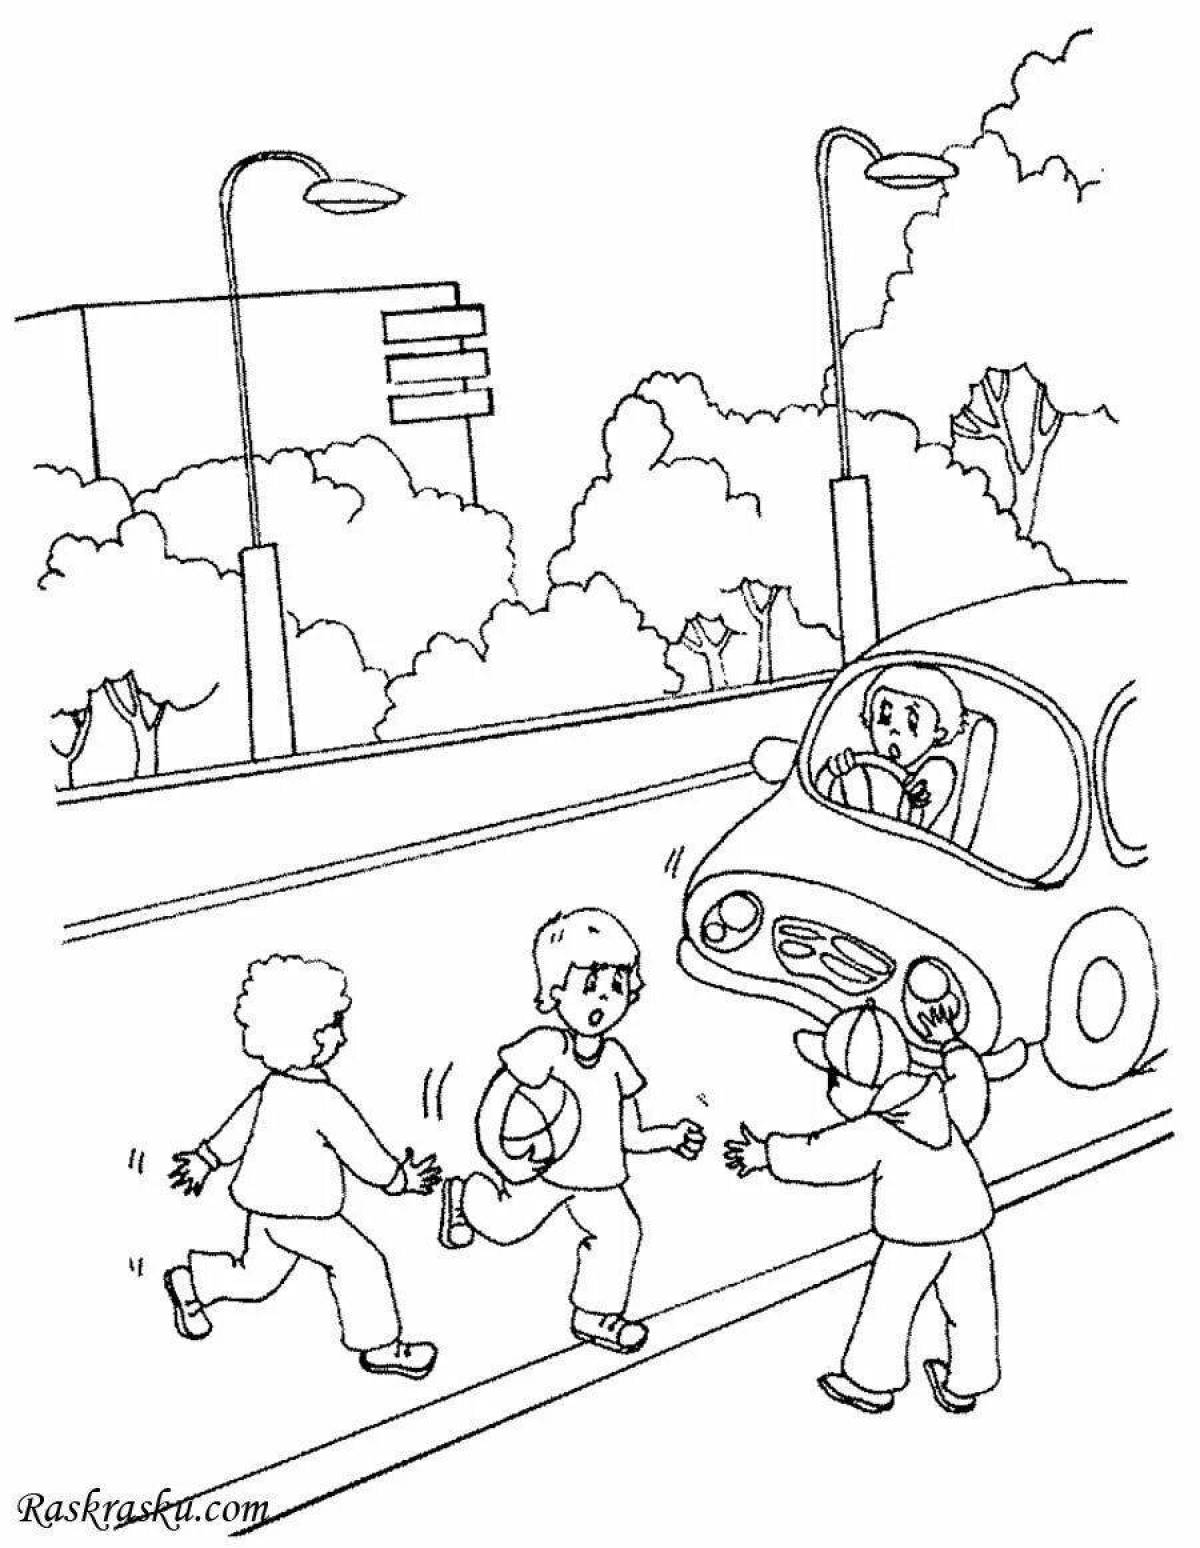 Inspiring road of life coloring page for kids